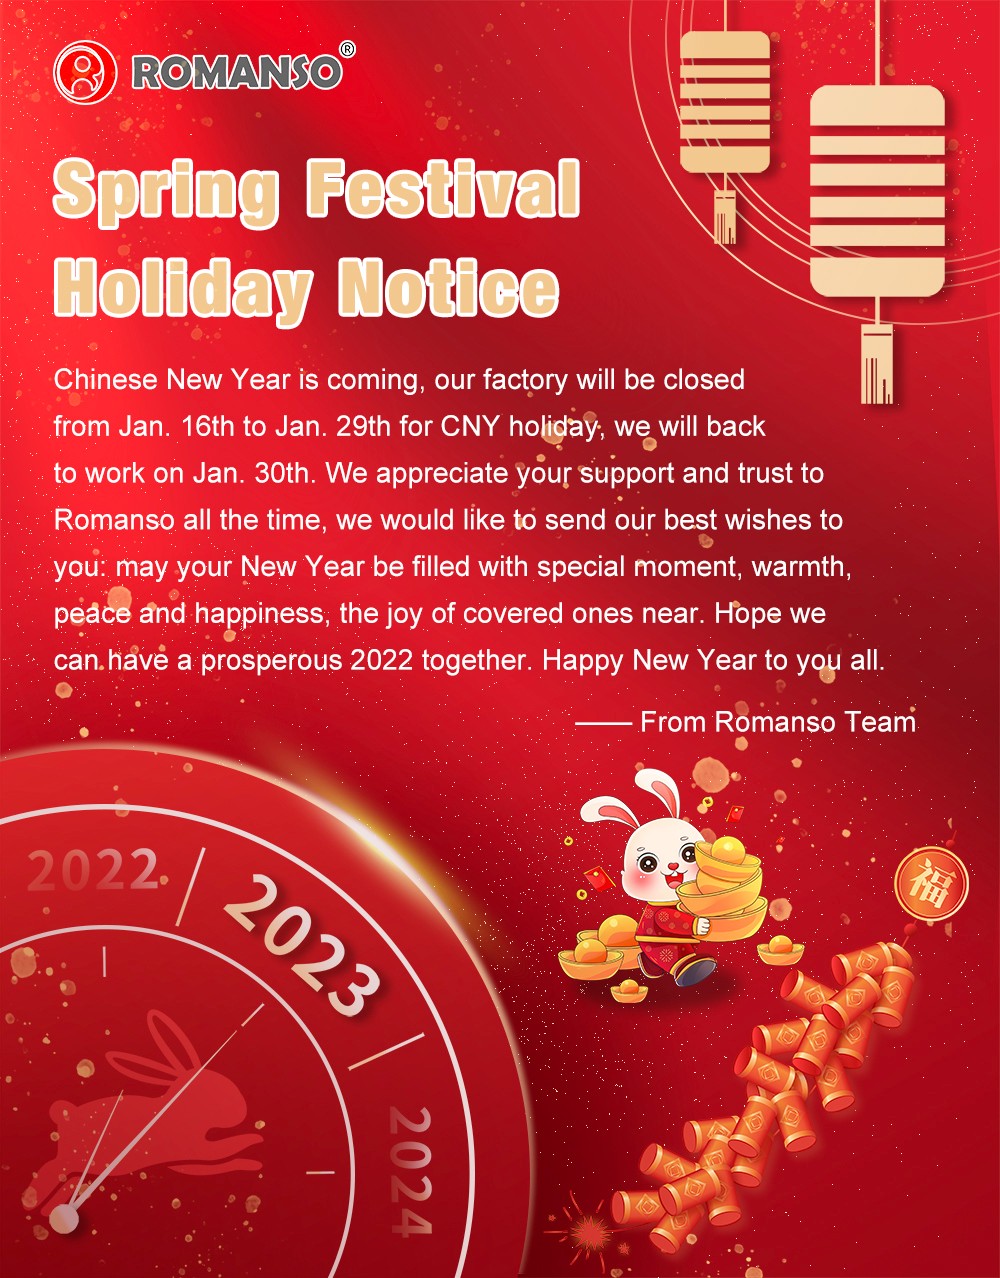 2022 Romanso Spring Festival Holiday Notice